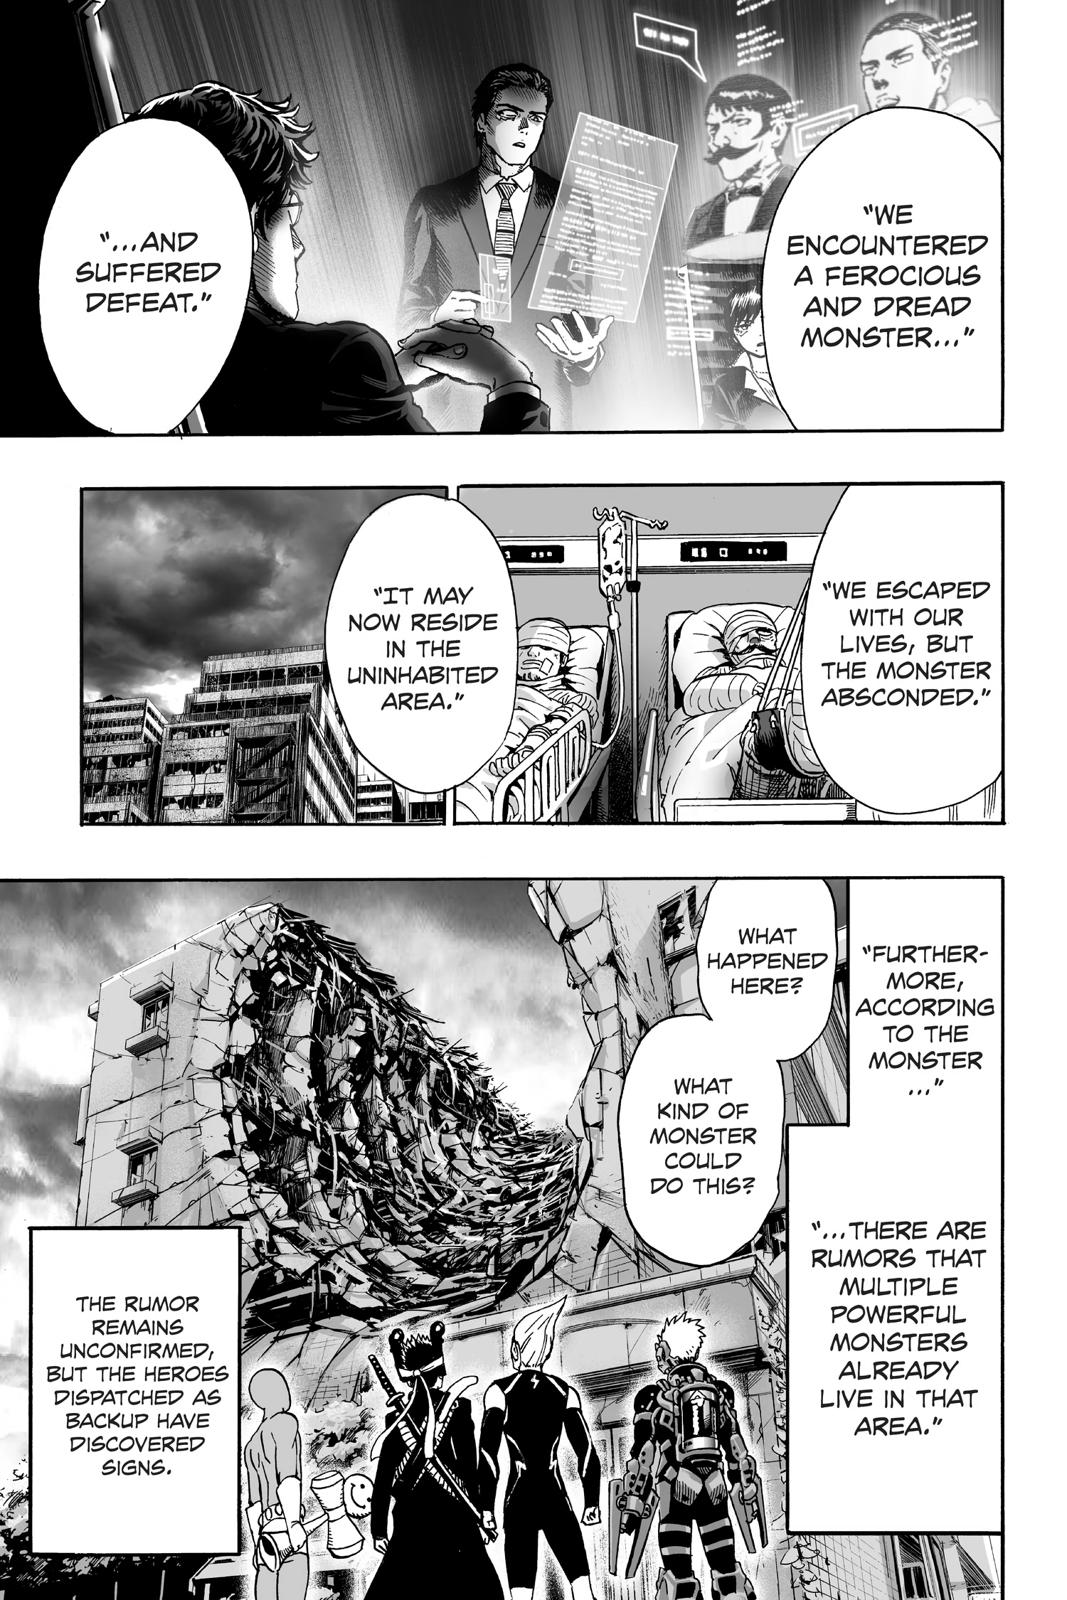 One-Punch Man, Punch 20 image 34